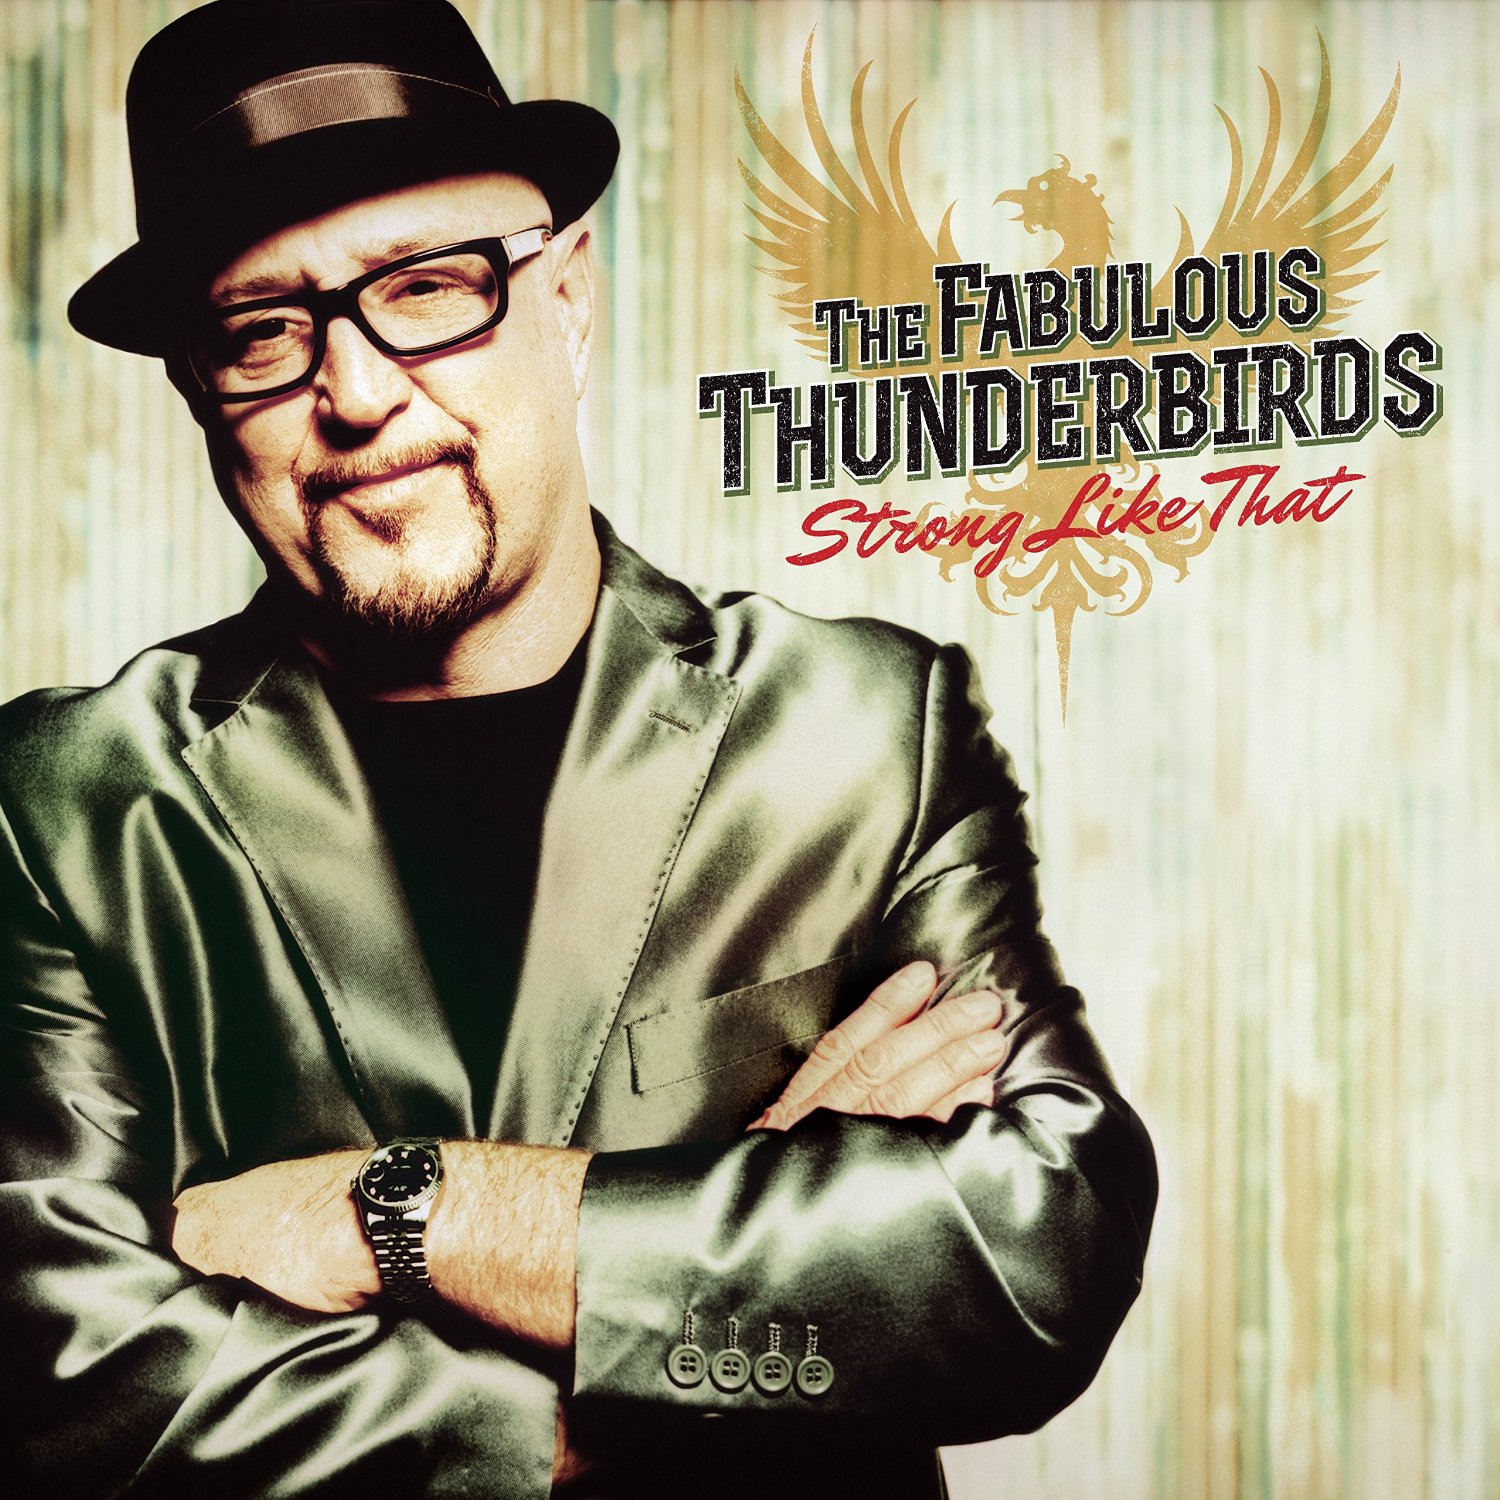 The Fabulous Thunderbirds- Strong Like That (2016) (mp3)